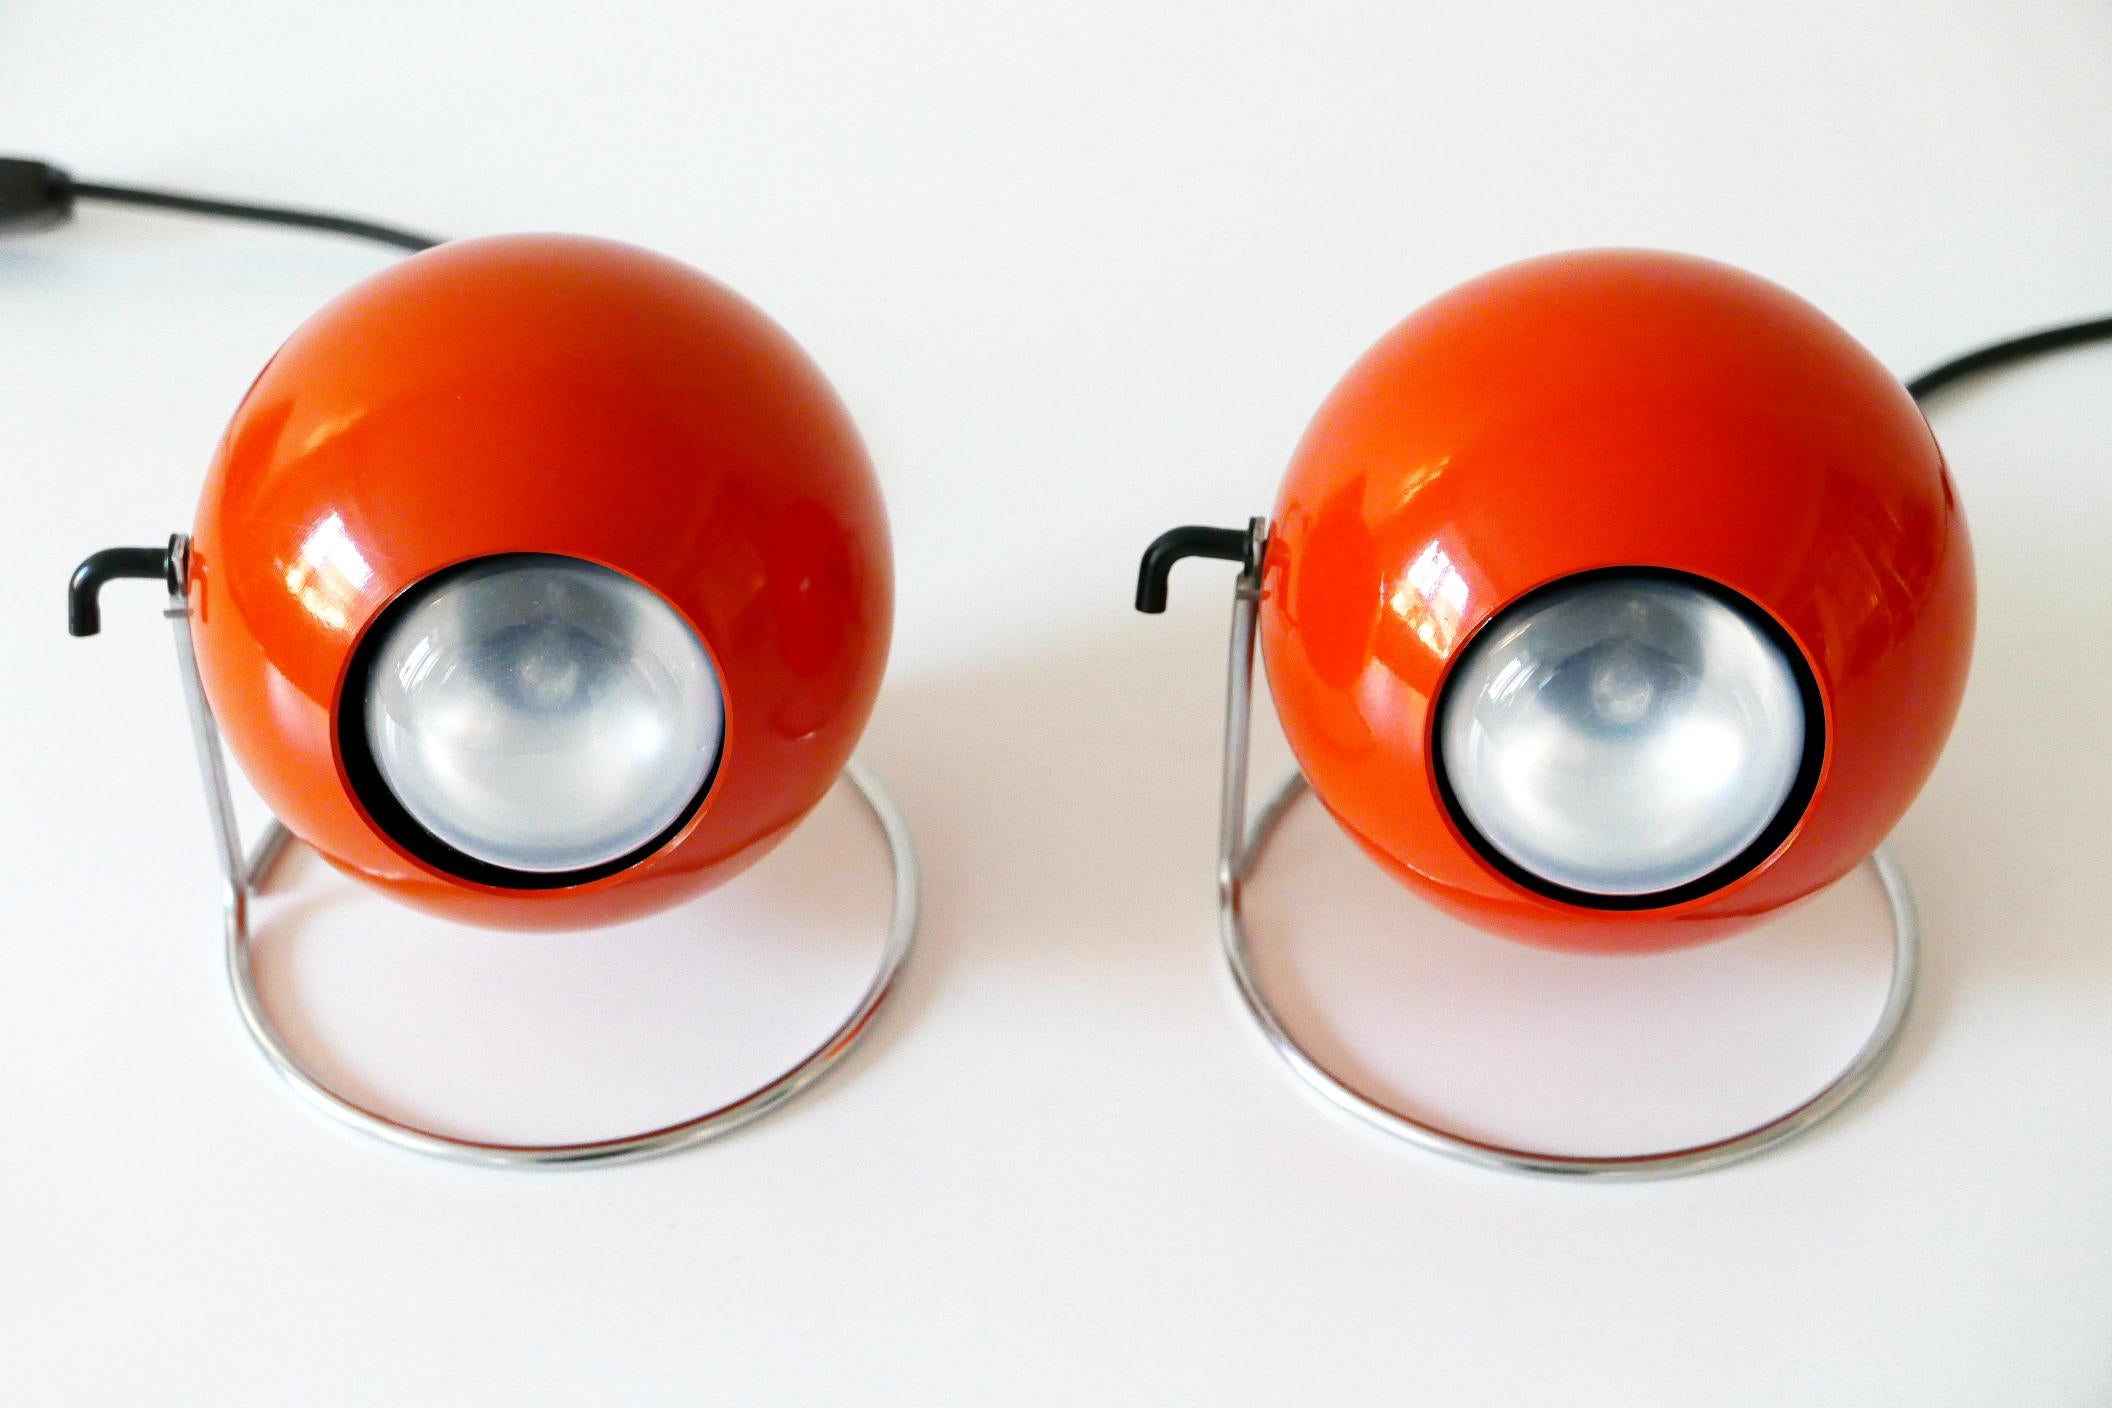 Set of Two Mid-Century Modern Metal 'Eye' Table Lamps, ERCO, 1960s-1970s Germany For Sale 3